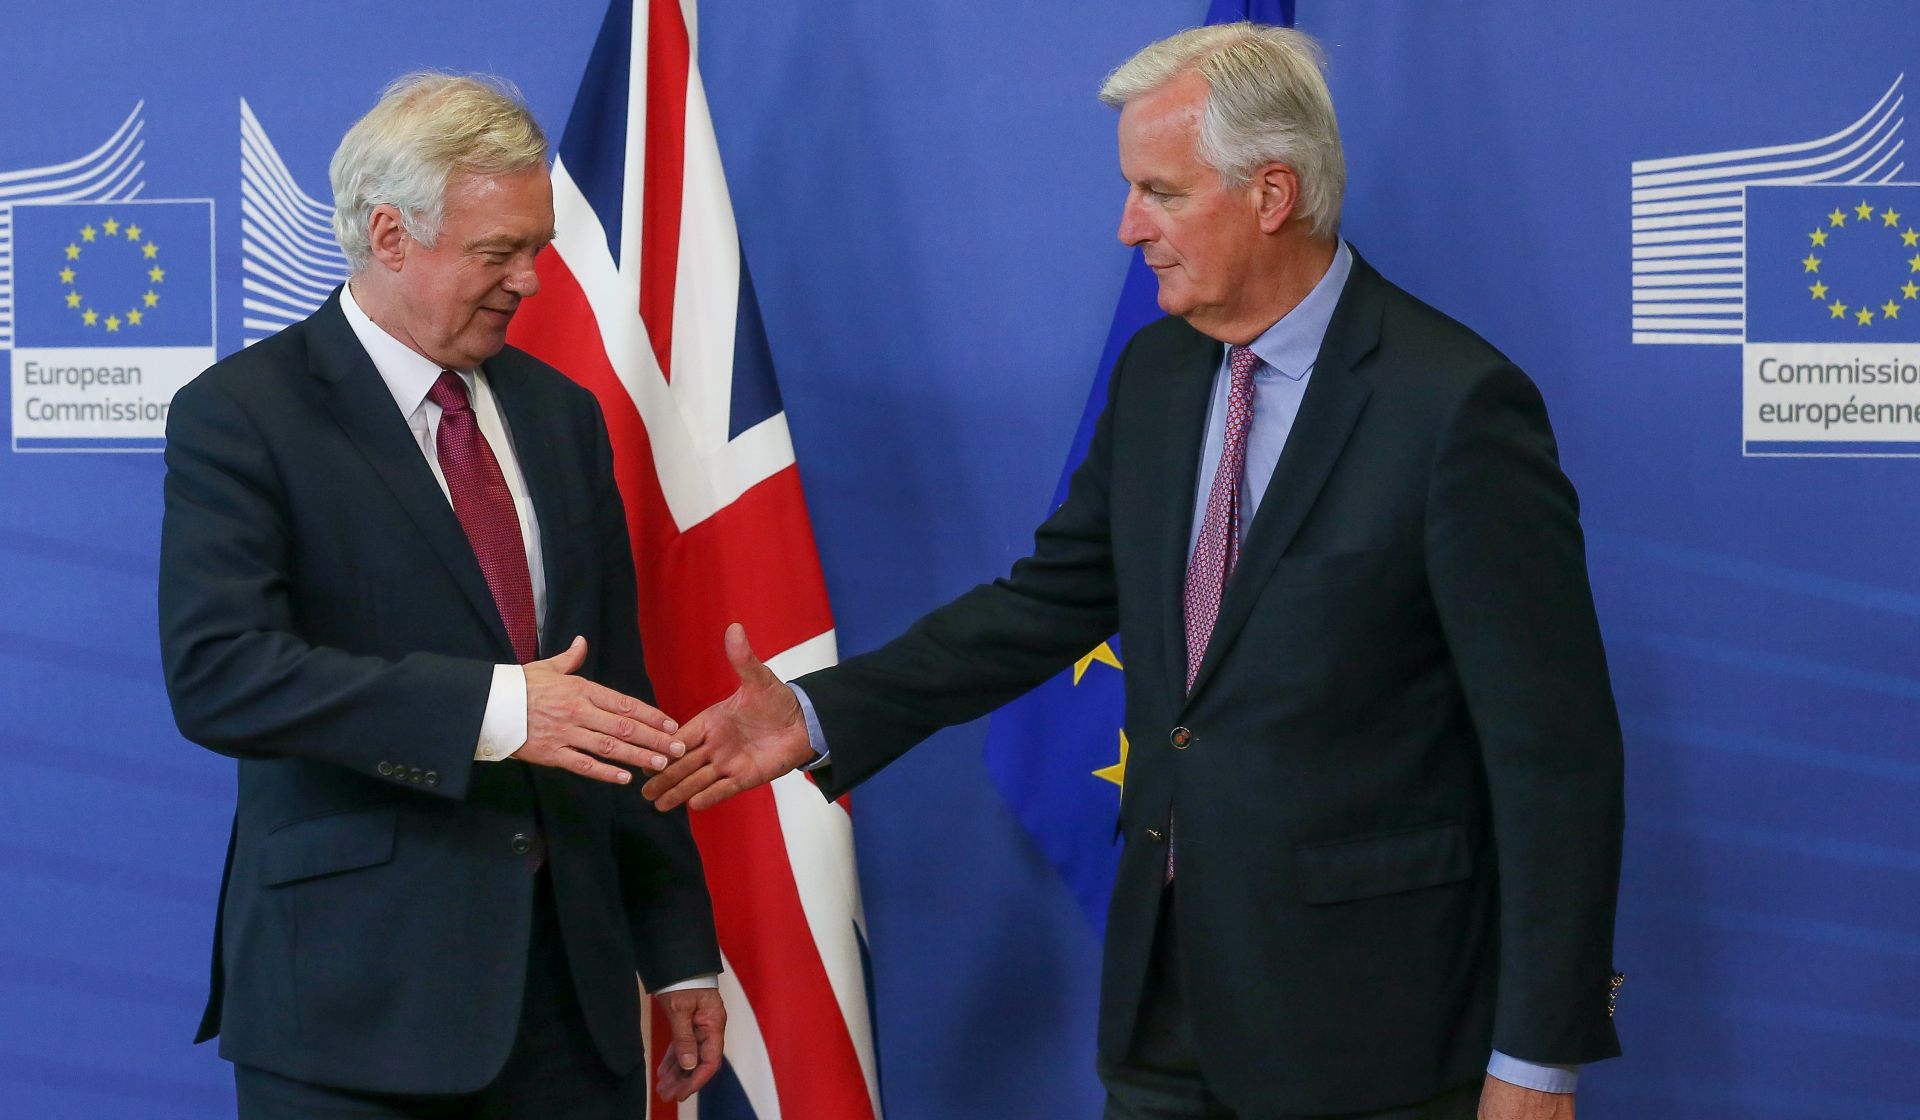 epa06036798 United Kingdom Secretary of State for Exiting the European Union, David Davis (L) is  welcome by Michel Barnier, the European Chief Negotiator of the Task Force for the Preparation and Conduct of the Negotiations with the United Kingdom under Article 50, dubbed the 'Brexit' ahead of a meeting at EU Commission in Brussels, Belgium, 19 June 2017. The first stage of the negotiations concerns the fate of European expatriates in the United Kingdom and Britons settled in Europe, the question of the Irish border and the 'financial regulation' between the United Kingdom and Europe.  EPA/STEPHANIE LECOCQ